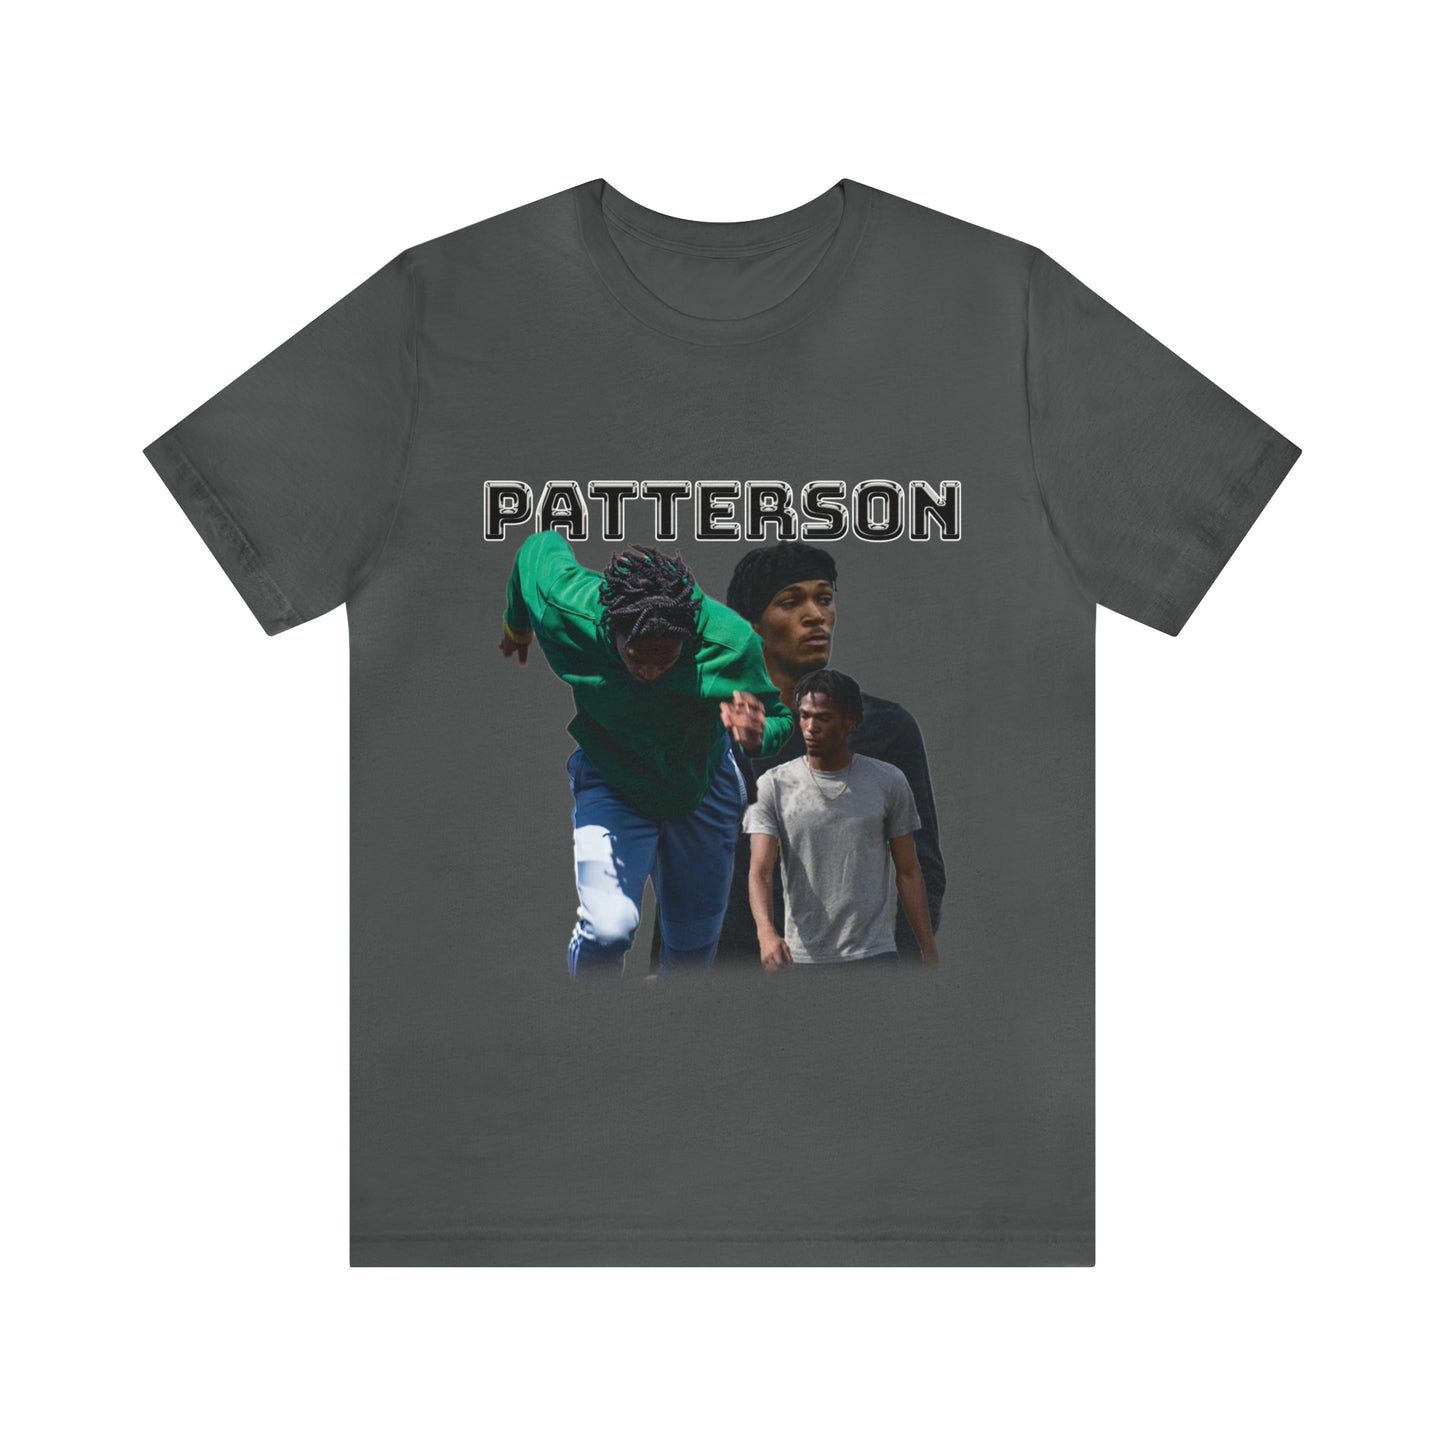 Lavell Patterson: Track Tee